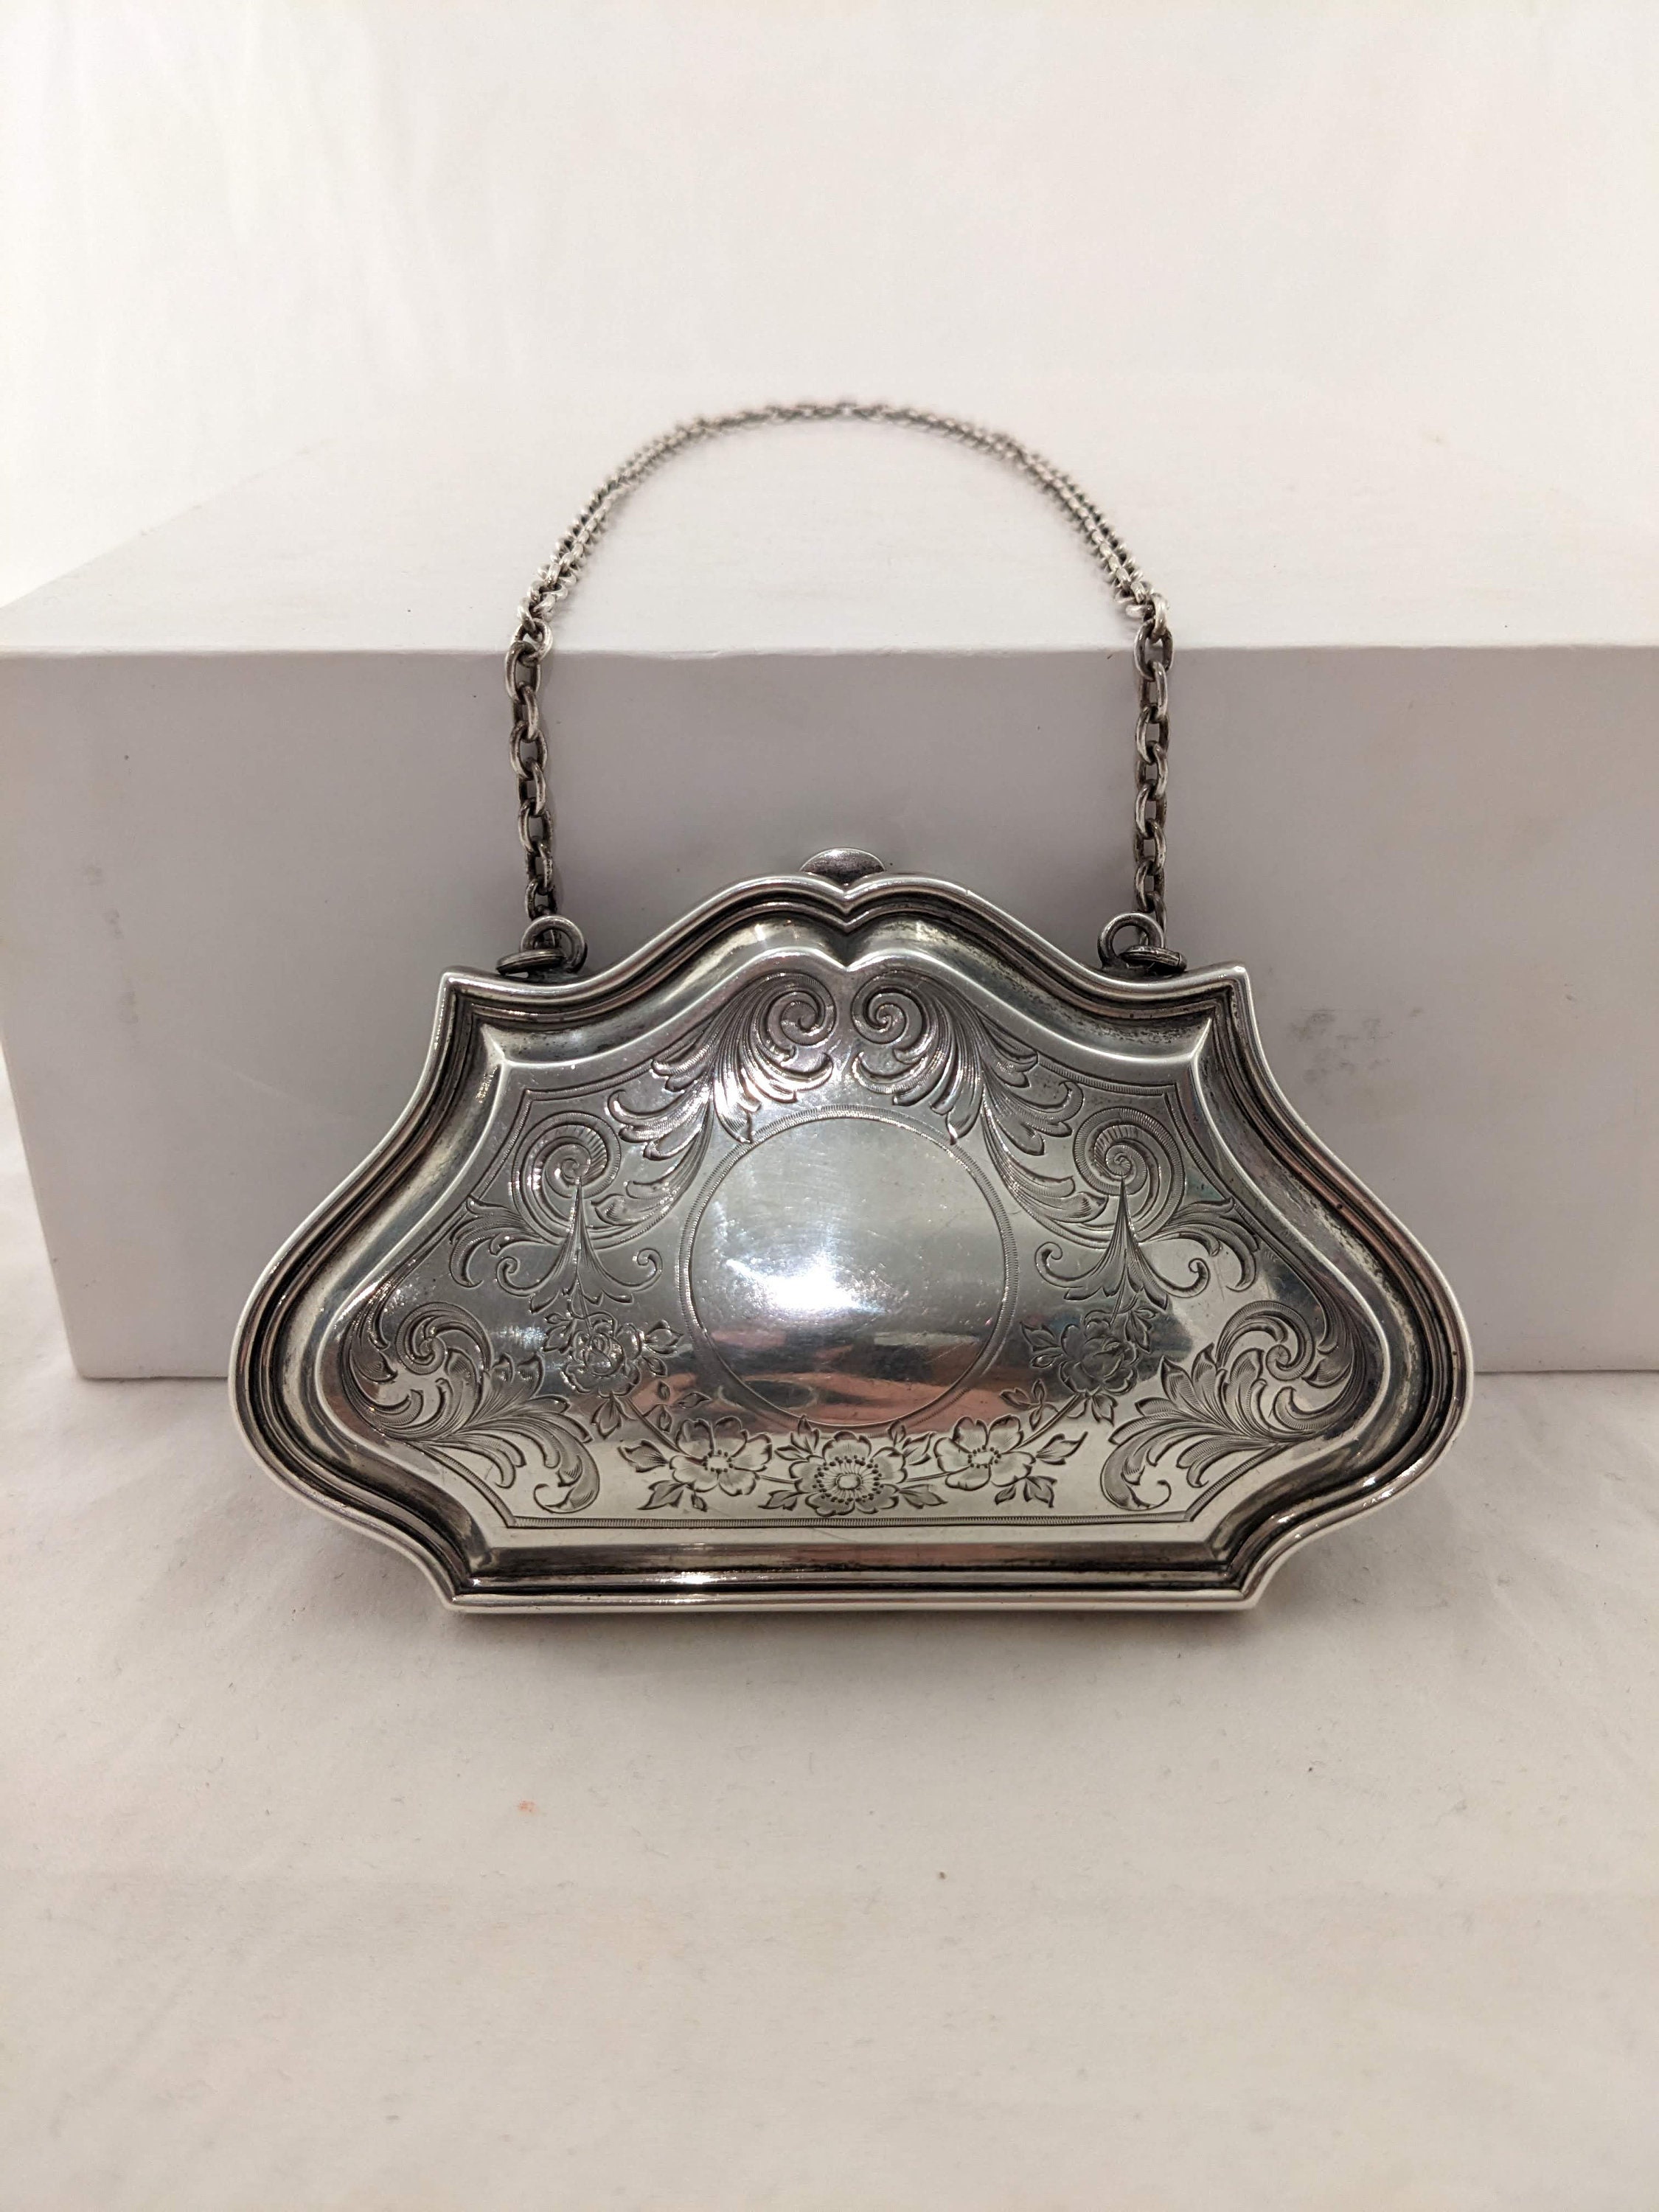 Antique Sterling Silver Coin Purse Compact Floral Scroll Monogrammed Bill  110421 | eBay